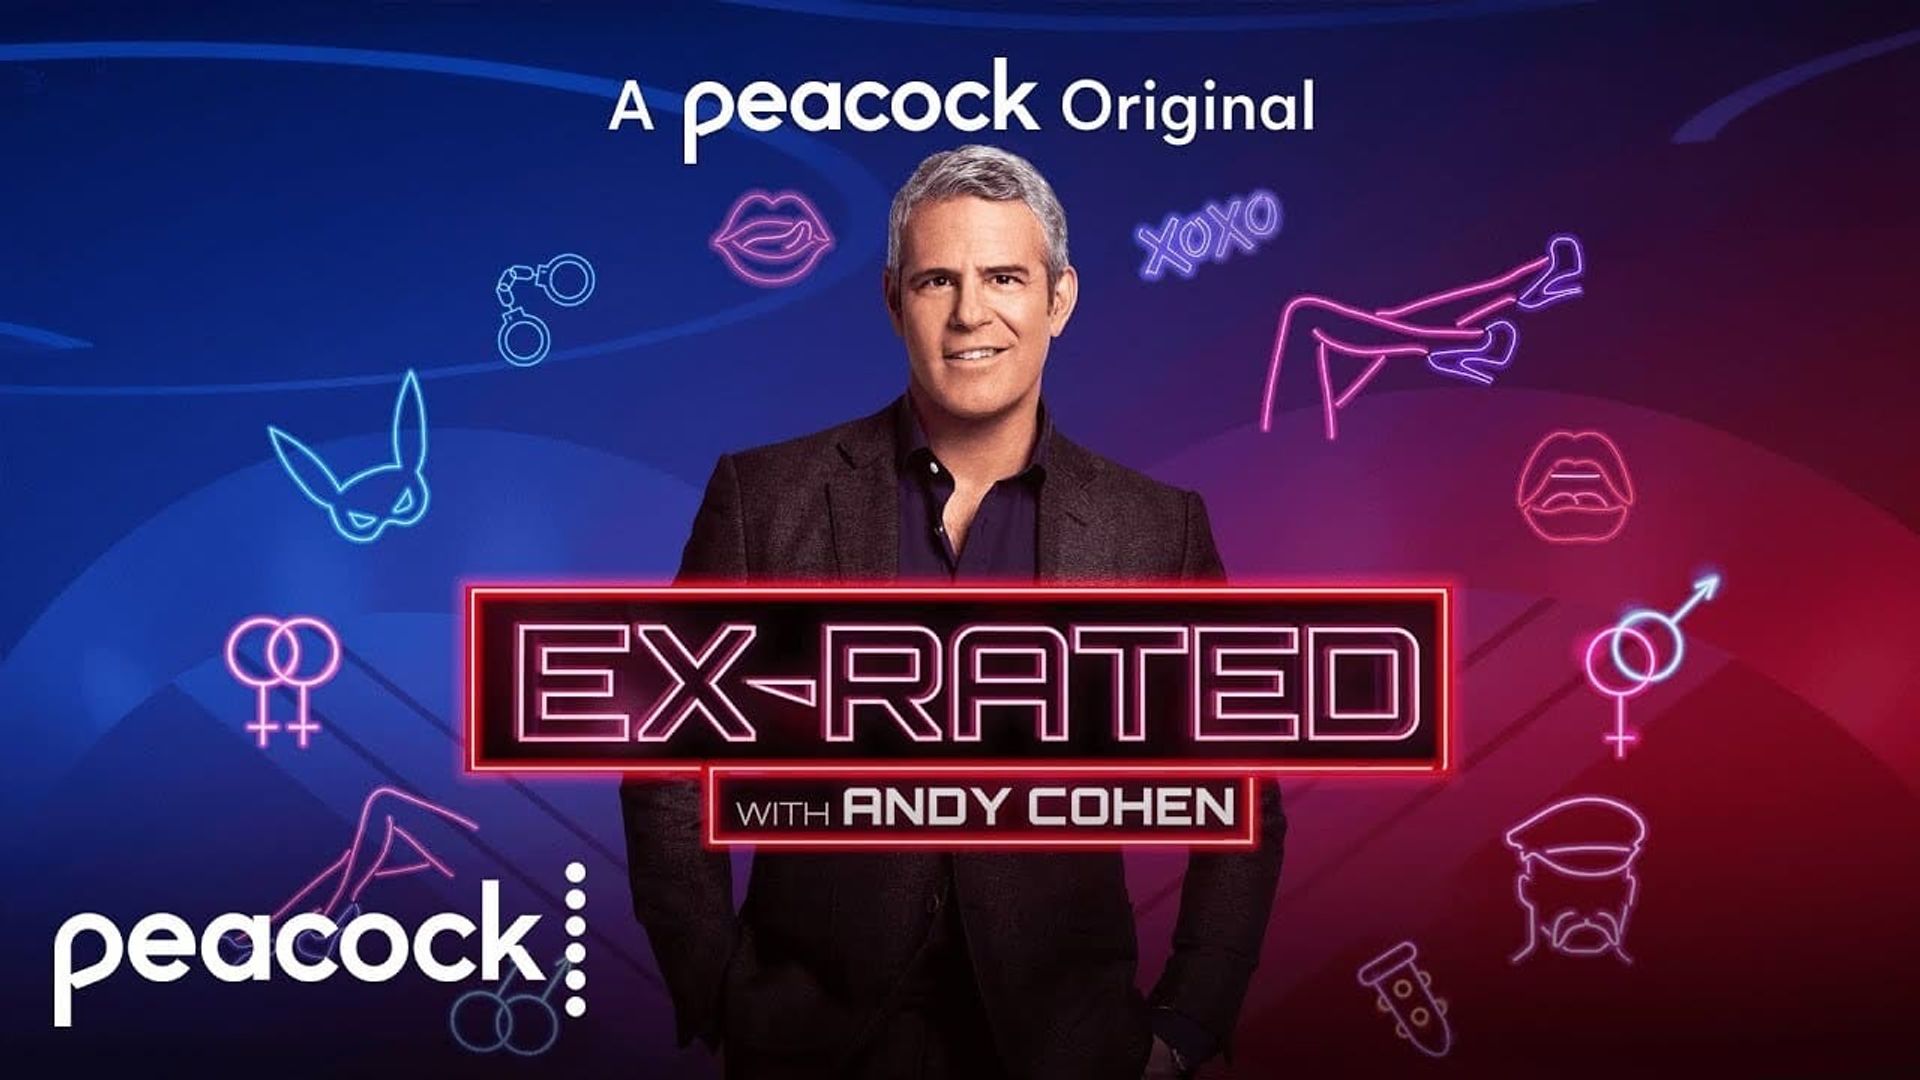 Ex-Rated with Andy Cohen background